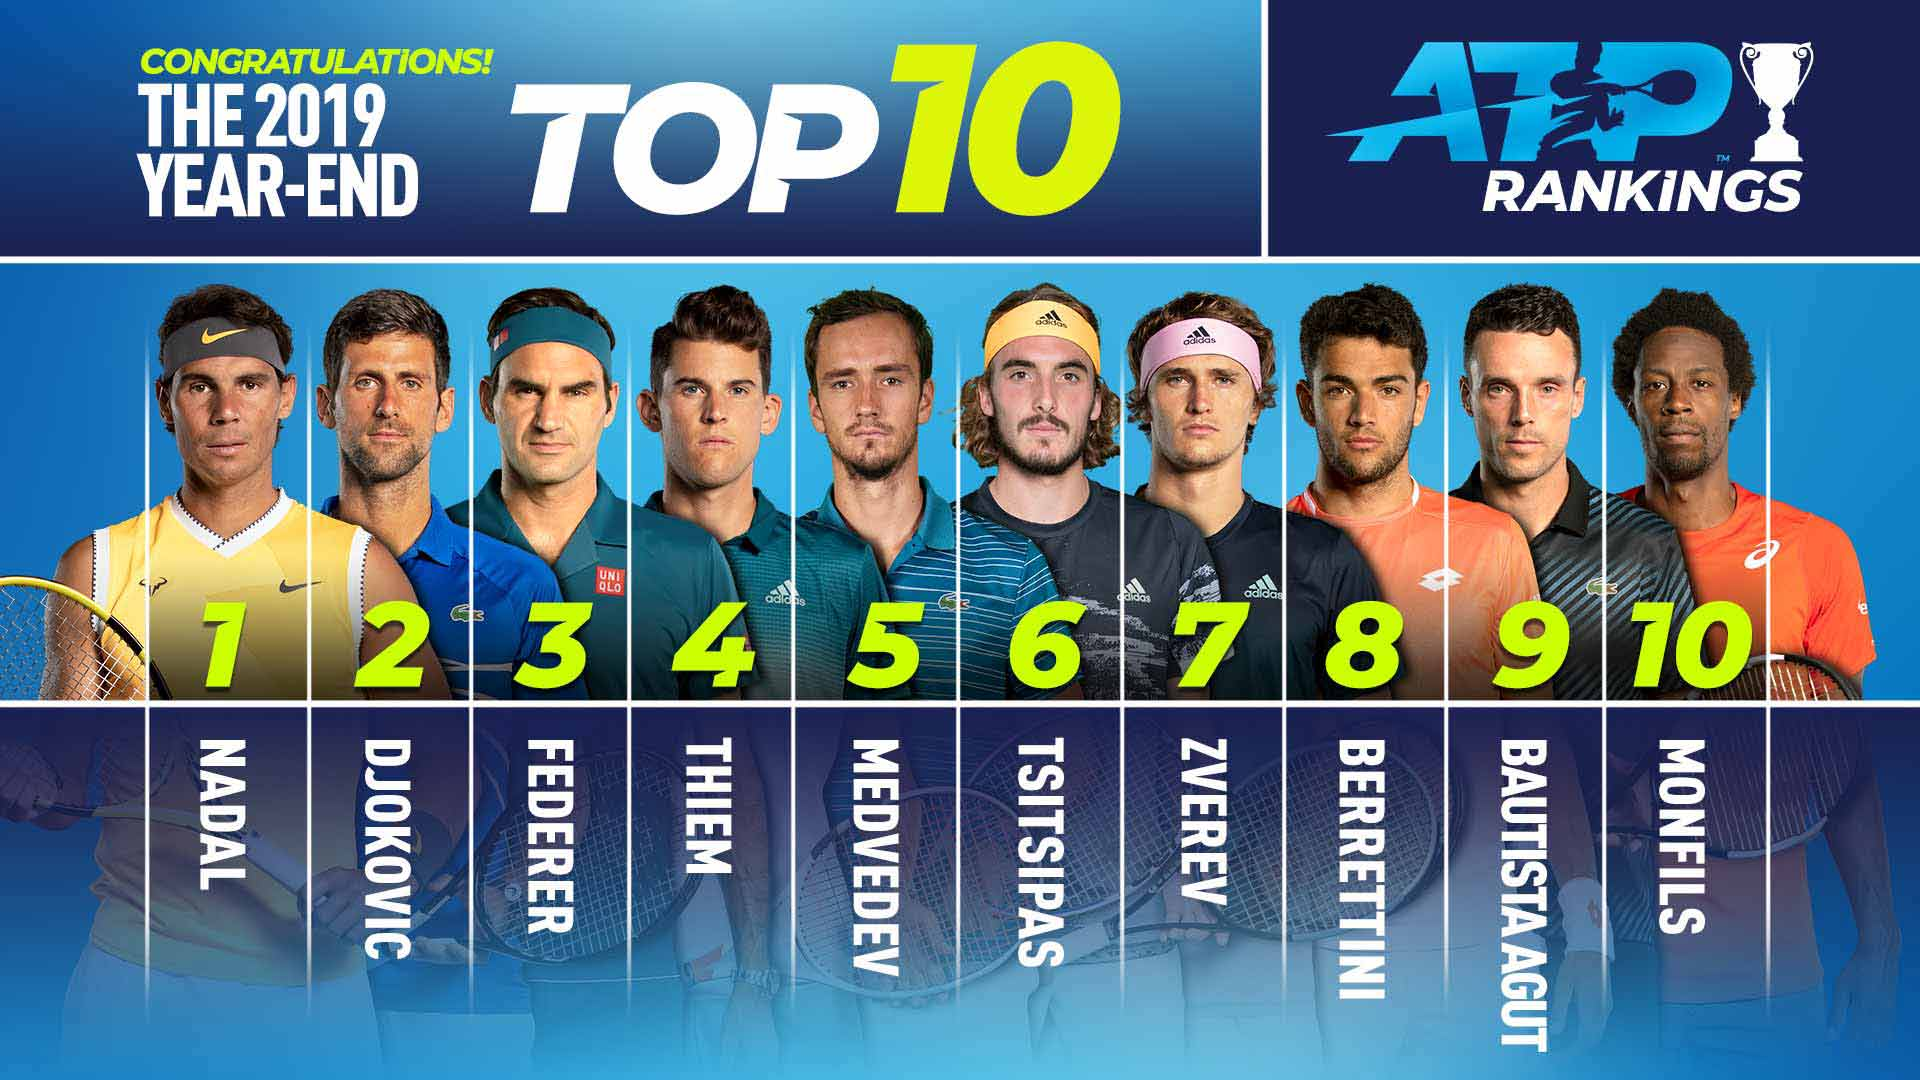 The top 10 of the year-end ATP Rankings in full ©ATP